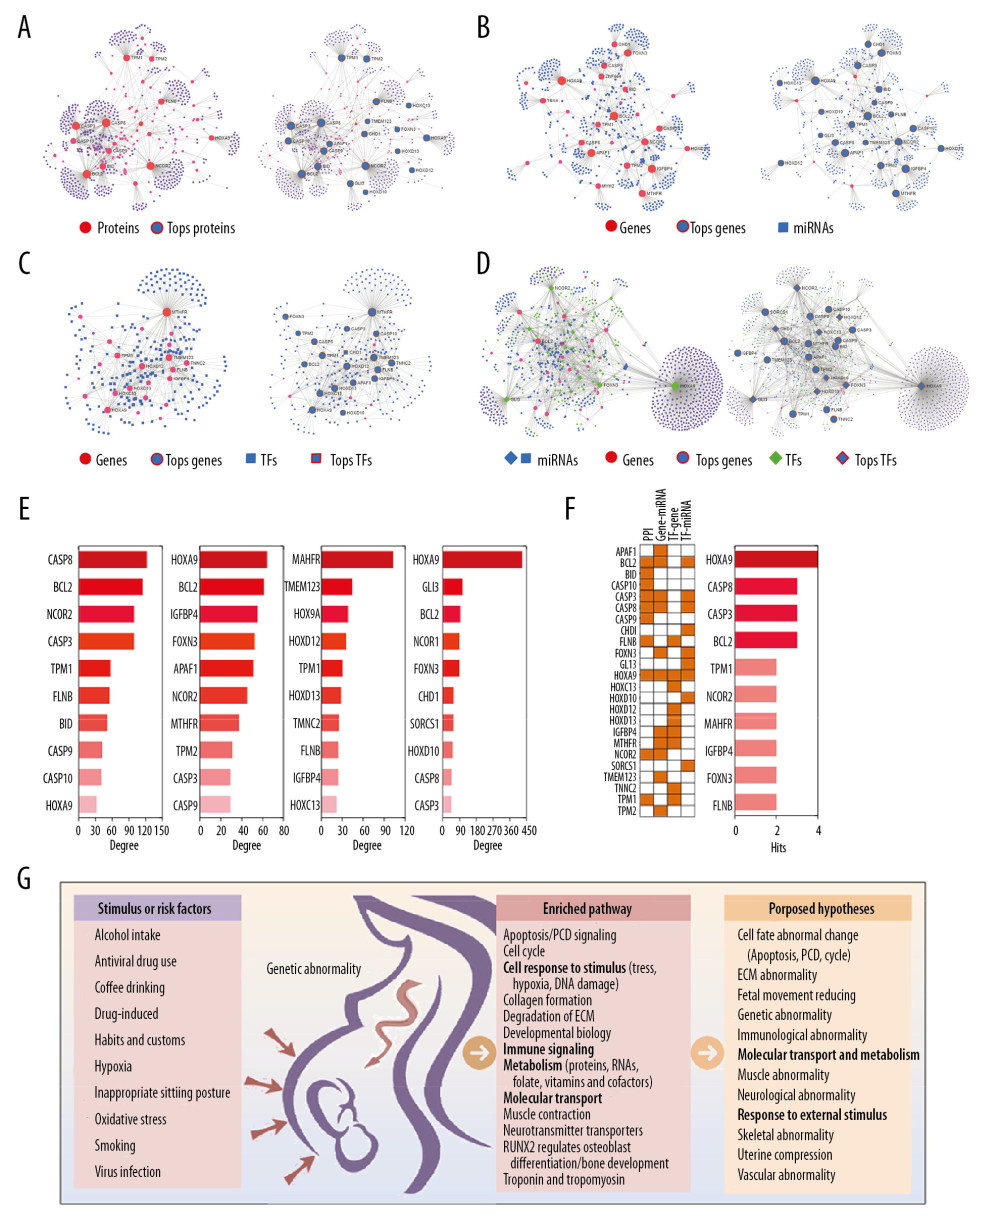 Protein-protein Interactions (PPI) and Gene Regulatory Networks (GRN) of the candidate genes by NetworkAnalyst. (A) Generic PPI. (B) Gene-miRNA Interactome. (C) Transcription factor (TF)-gene interaction database. (D) TF-miRNA coregulatory interaction. Right was the top 10 genes in the 4 aforementioned interactions in A–D. (E) Top 10 interactions. The order from left to right is PPI, Gene-miRNA, TF-gene interaction, and TF-miRNA coregulatory interaction. (F) The distribution and frequency of the top 10 genes in the 4 aforementioned interactions. Left: distribution. Right: frequency. (G) Proposed theories of clubfoot.